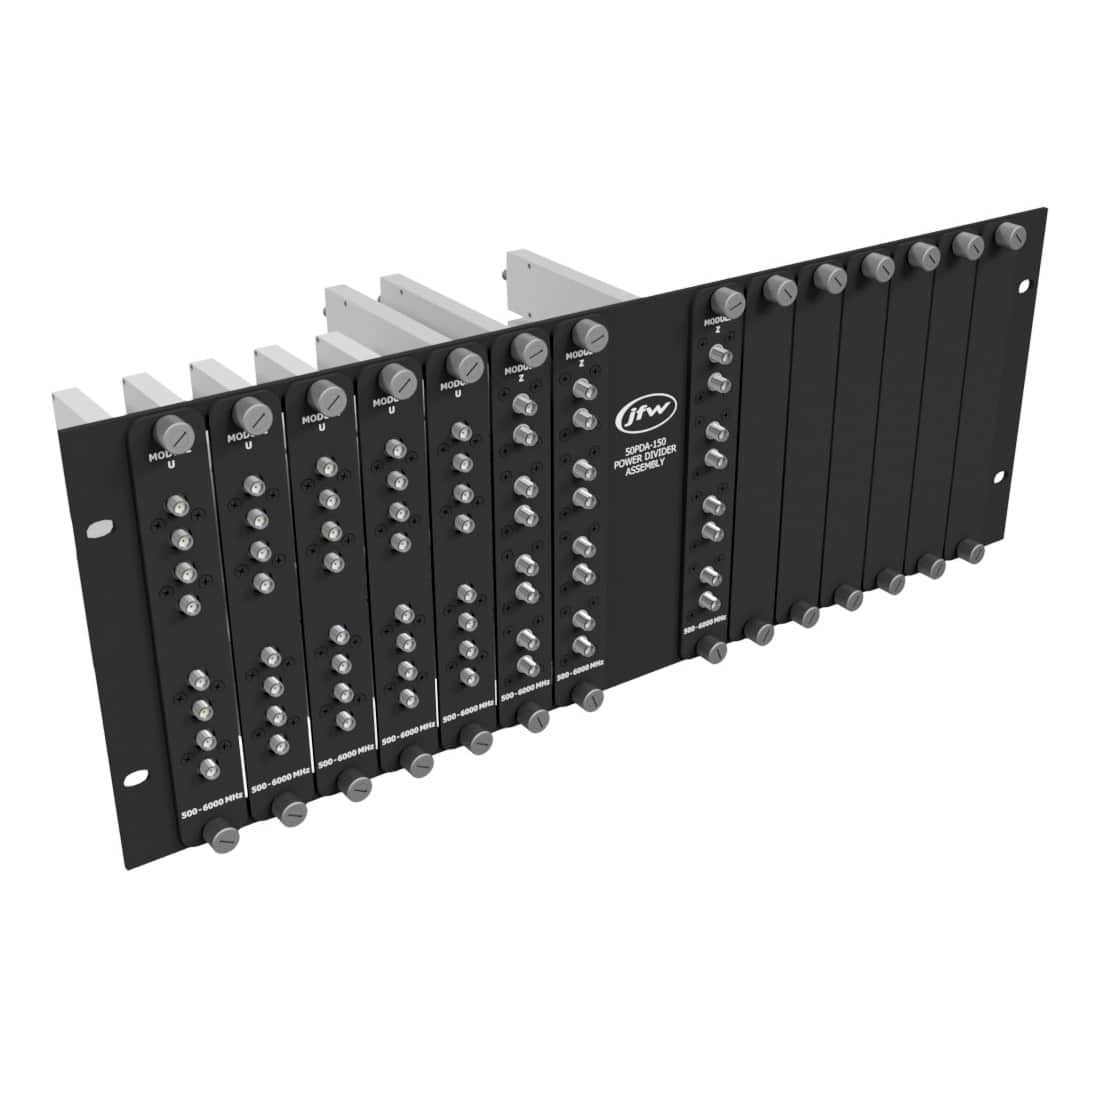 Power divider/combiner assembly model 50PDA-150 with five U modules and three Z modules